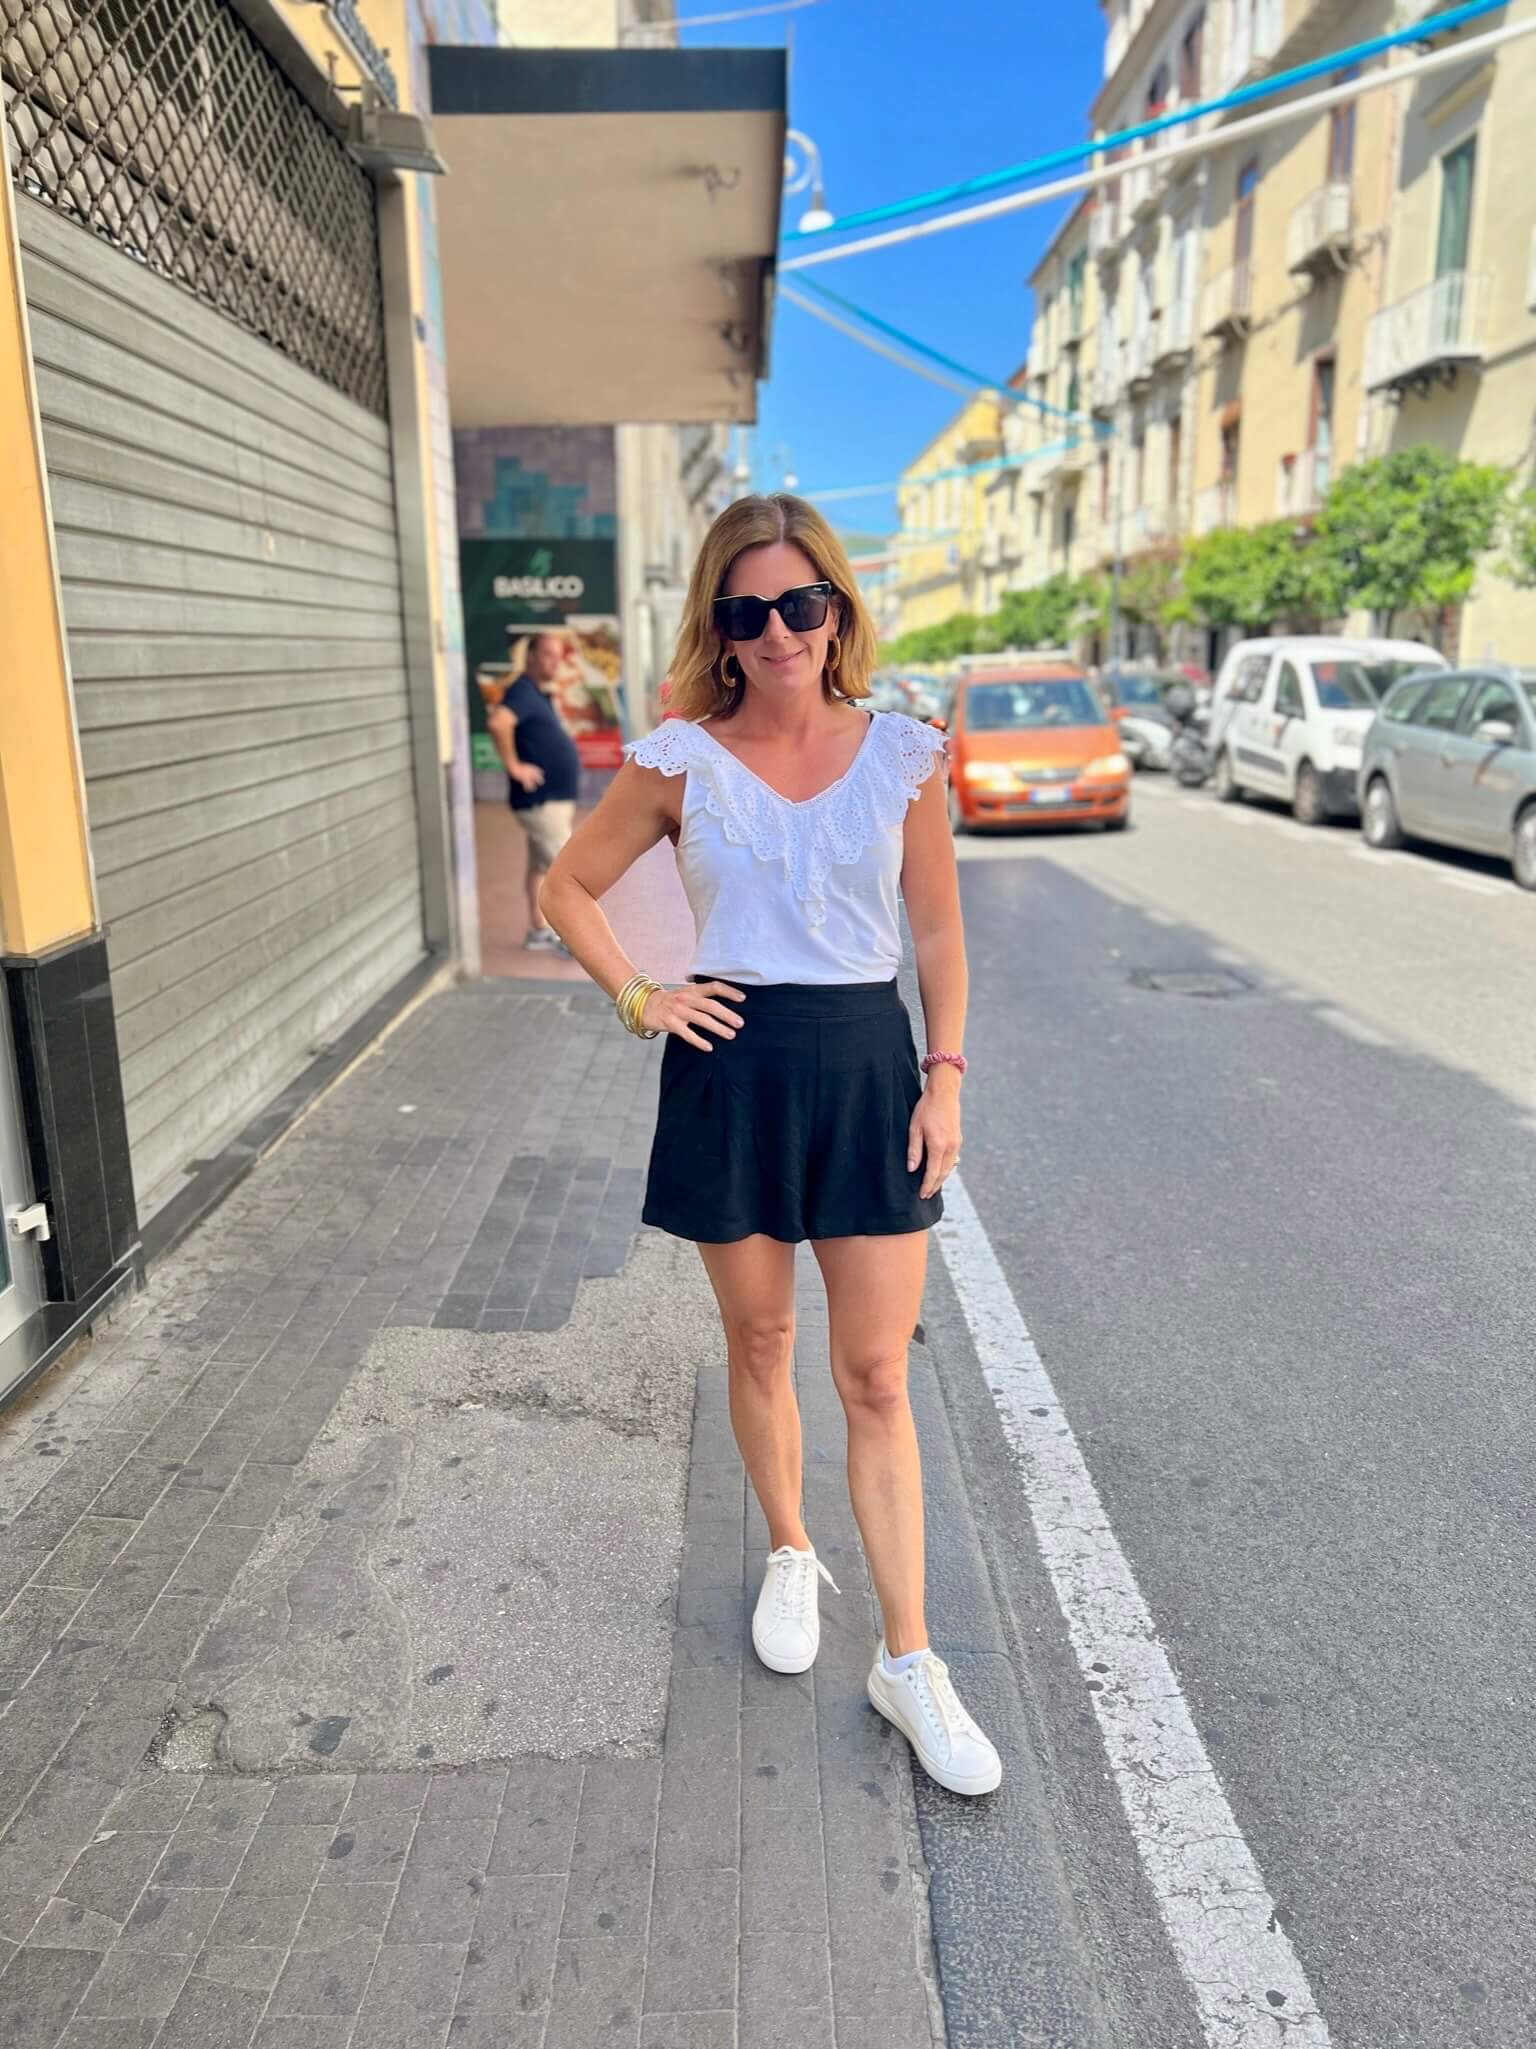 How To Pack For A European Vacation Elevated White Tank & Black Shorts how to wear black and white for summer how to style black shorts how to wear shorts in your 40s the best accessories for your summer travels what to wear in Europe how to dress for traveling in Europe